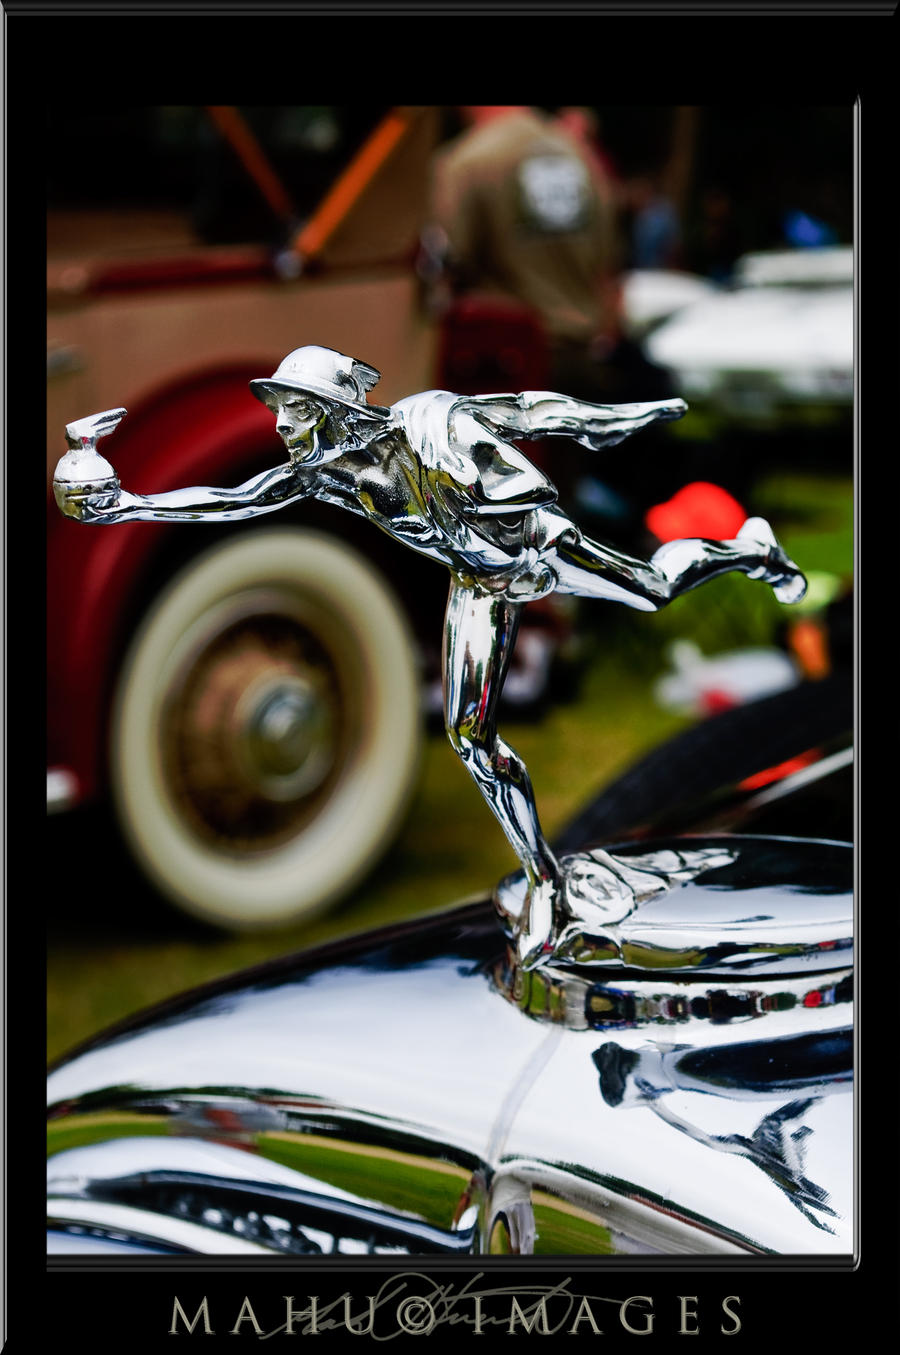 1930 Buick Hood Ornament by